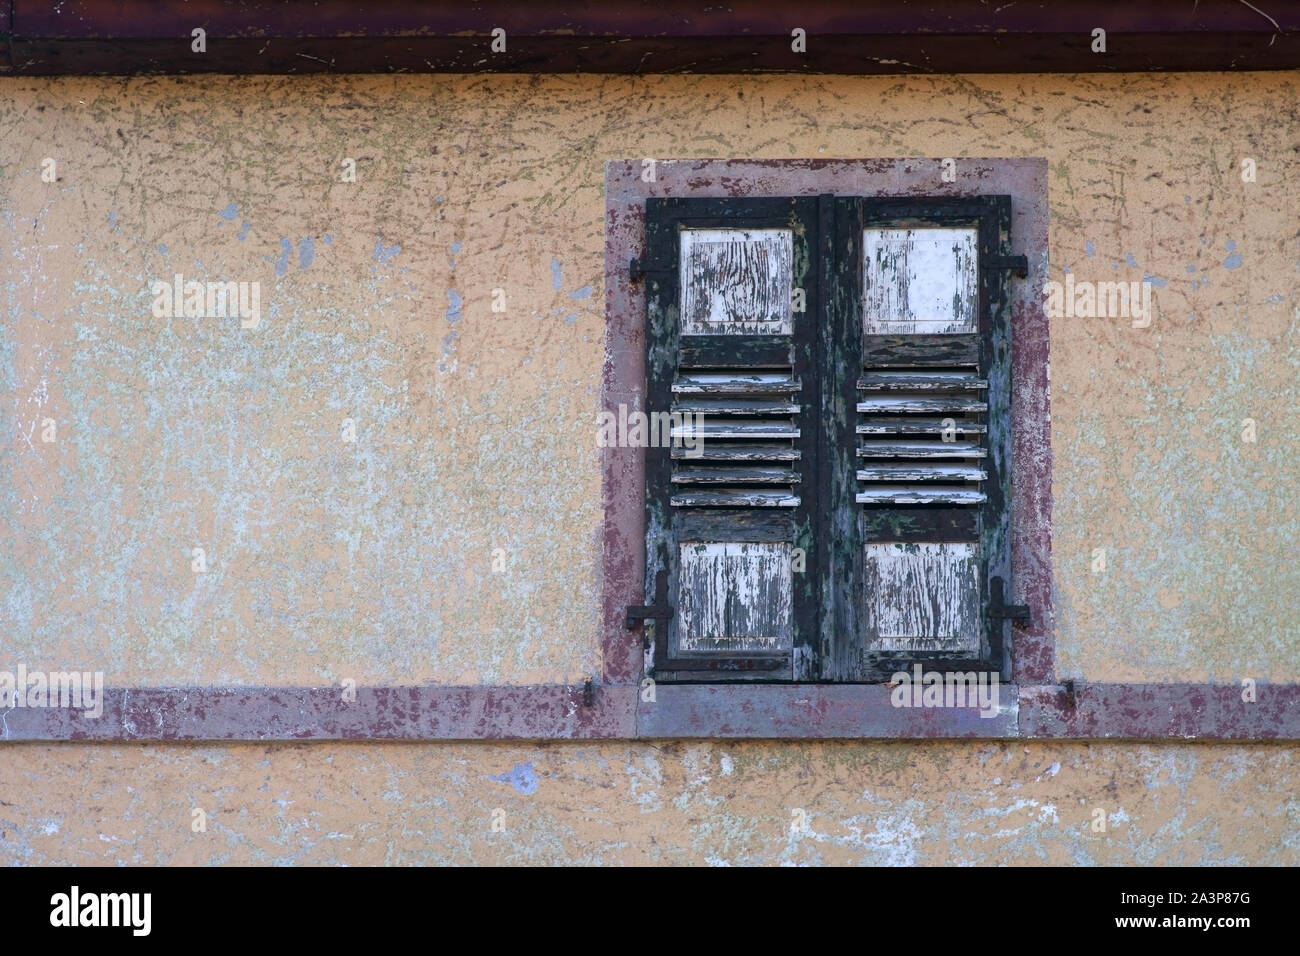 A rotten and dilapidated shutter of a window on a bleached facade. Stock Photo